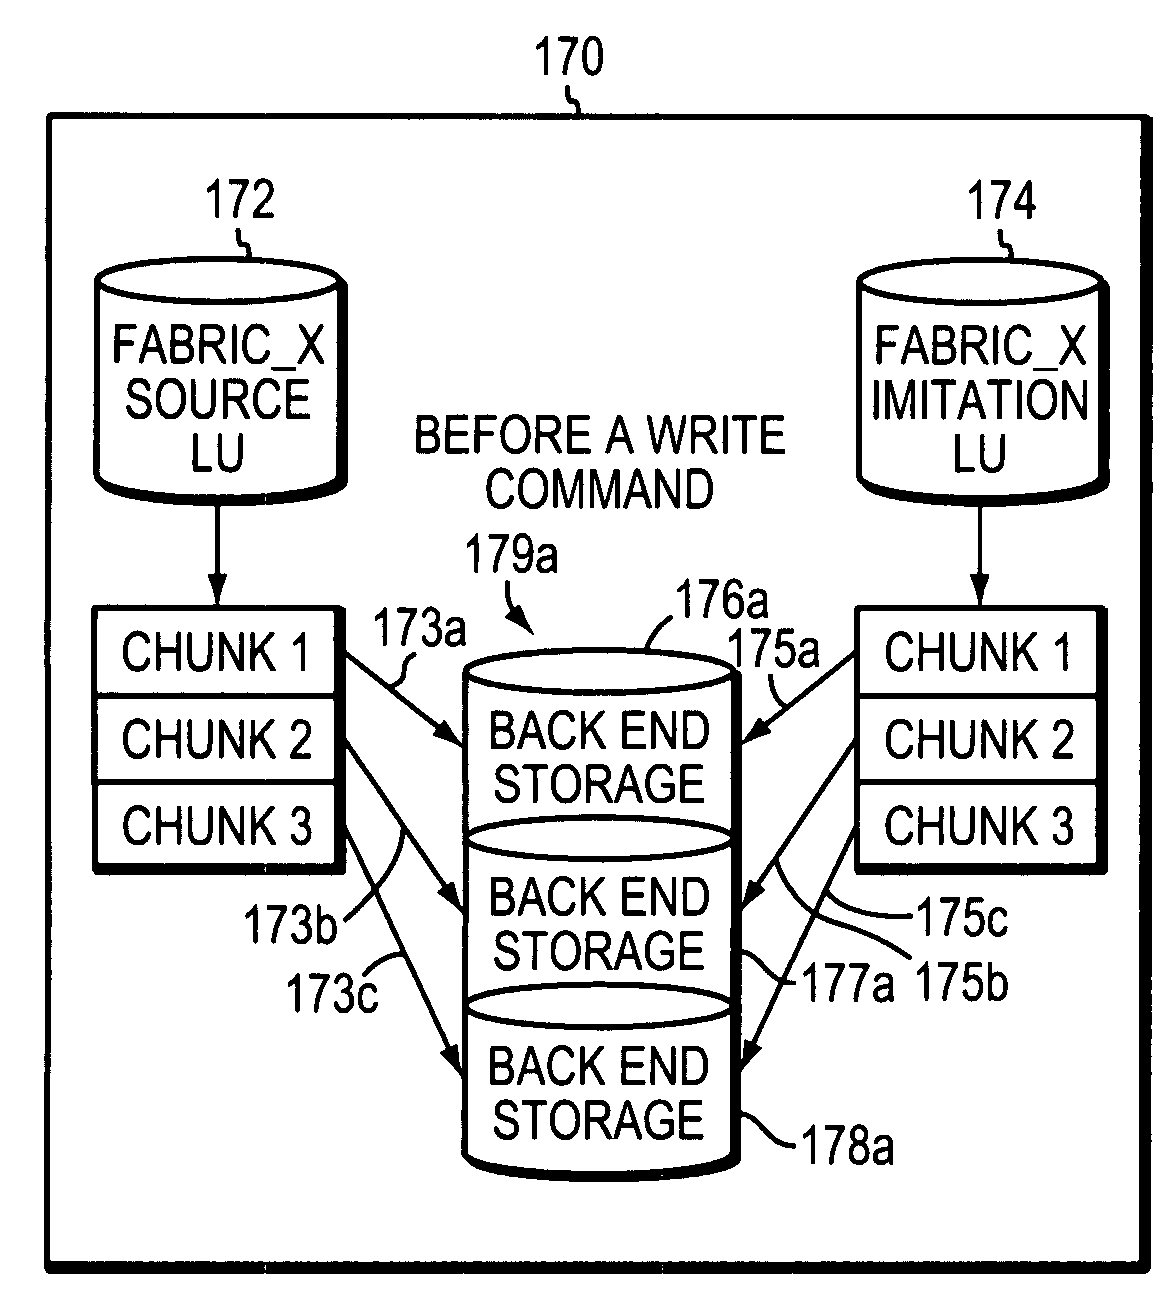 System and method for managing storage networks and providing virtualization of resources in such a network using one or more ASICs